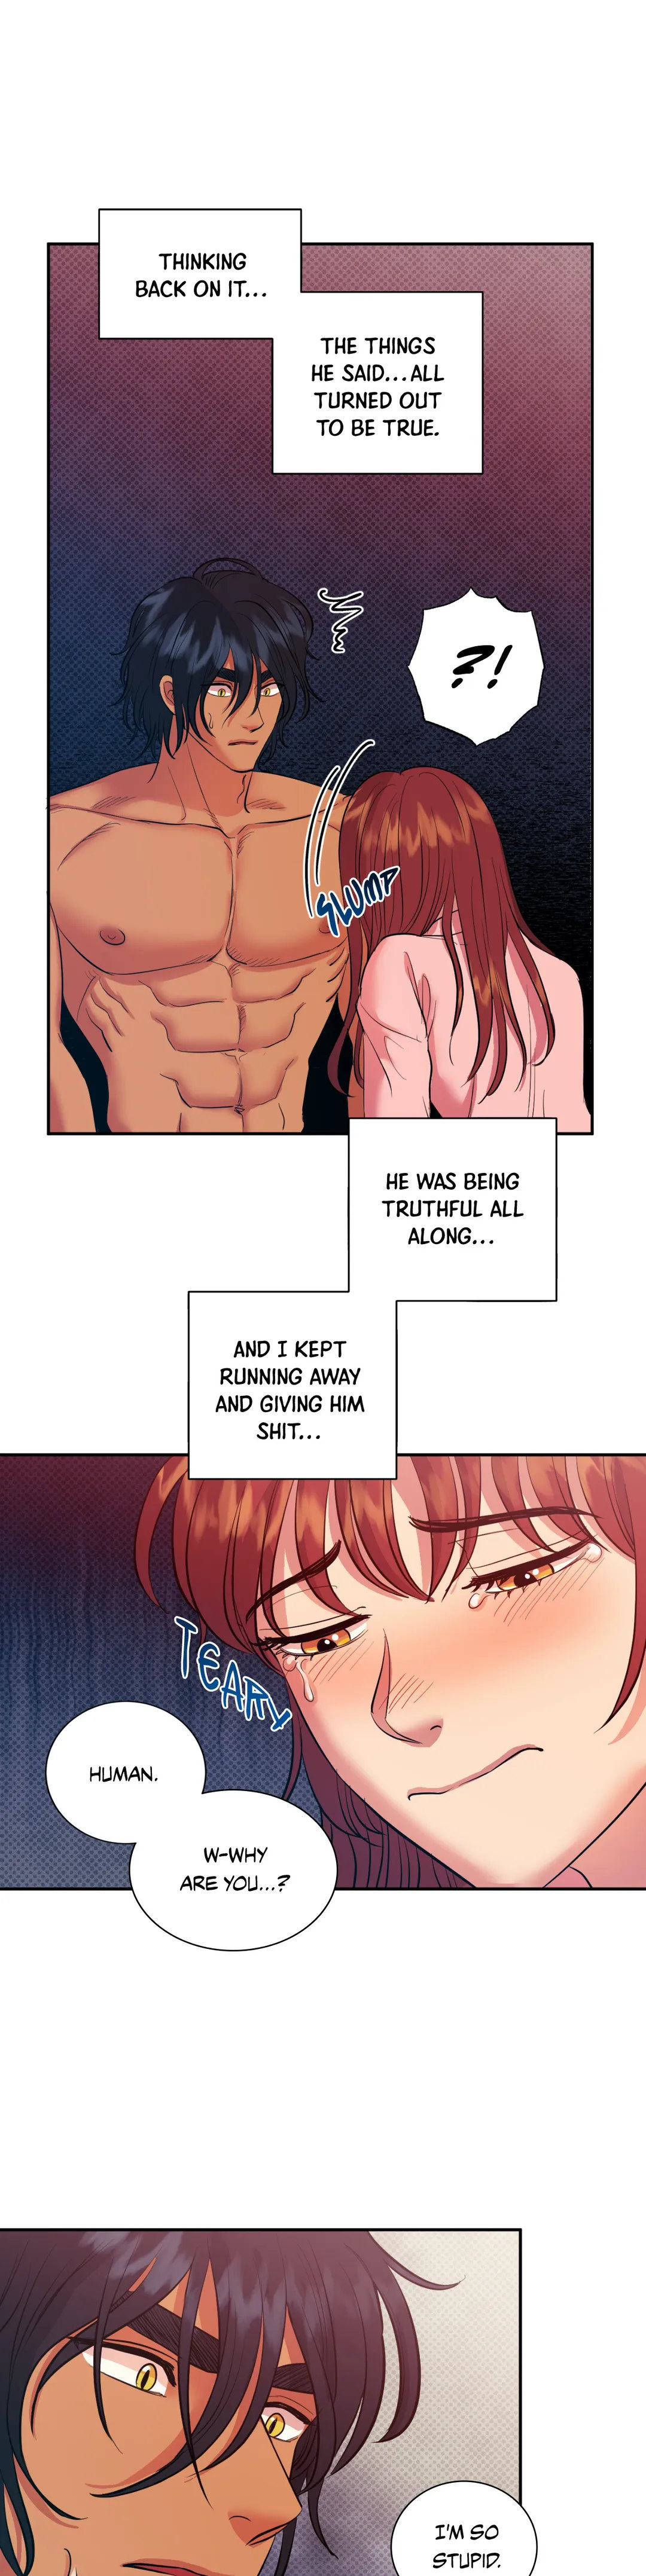 Hana’s Demons of Lust Chapter 12 - Page 20